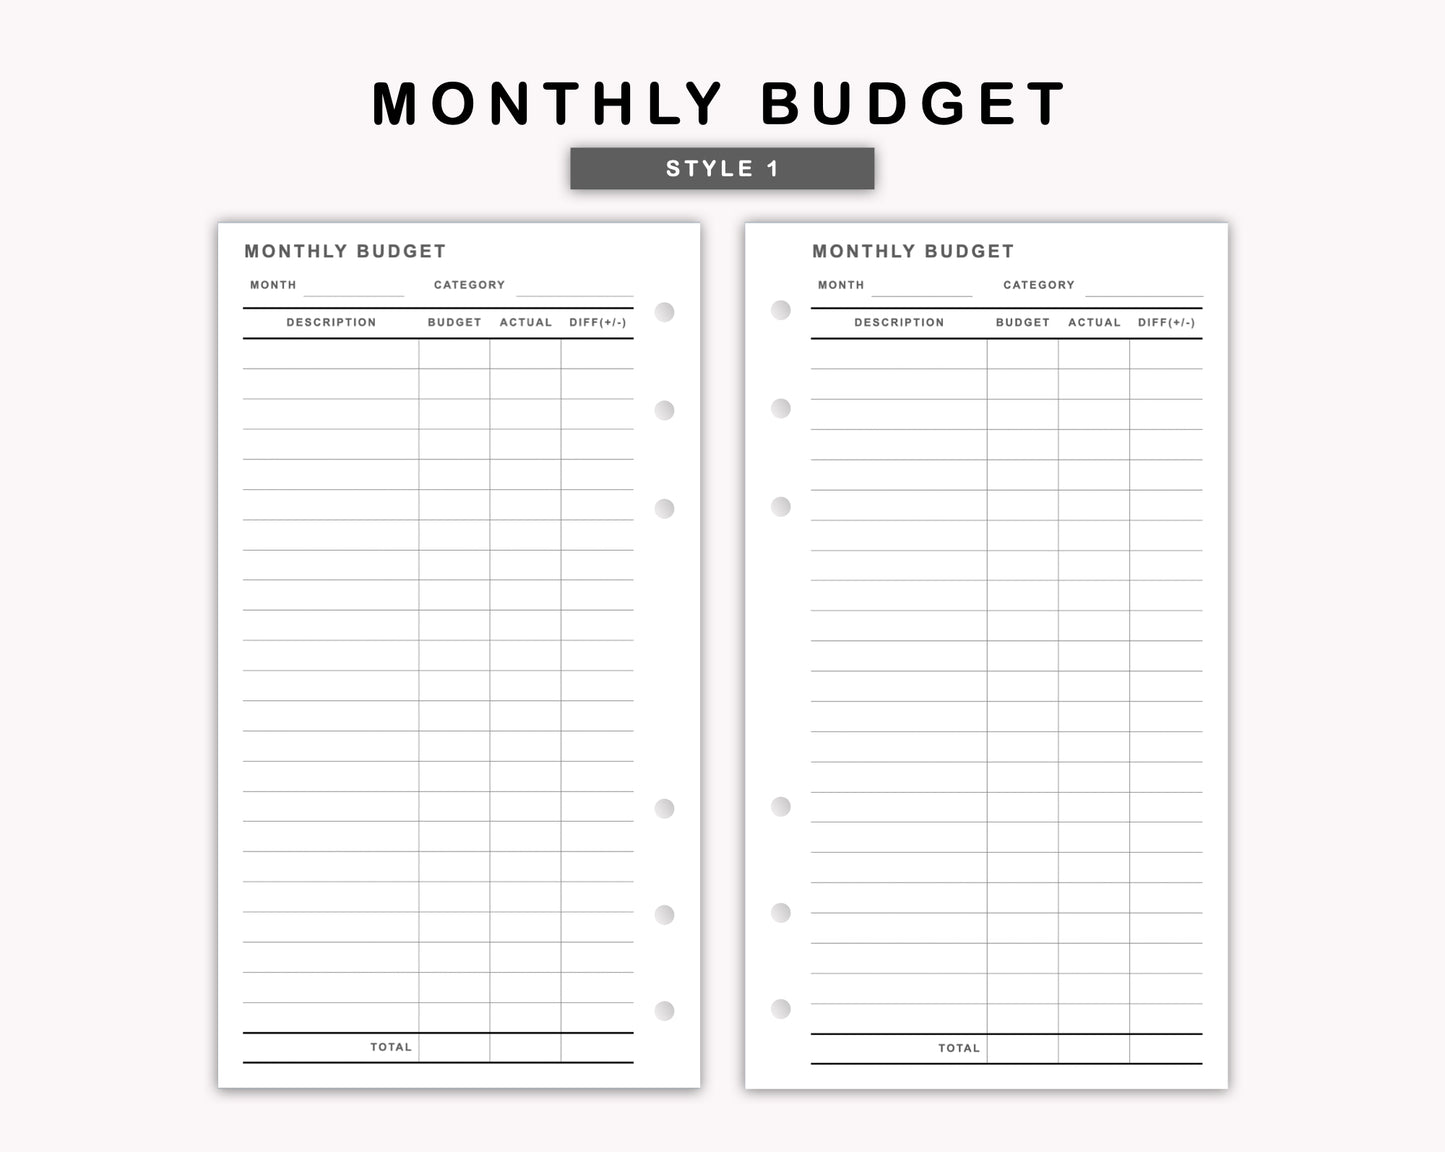 Personal Inserts - Monthly Budget